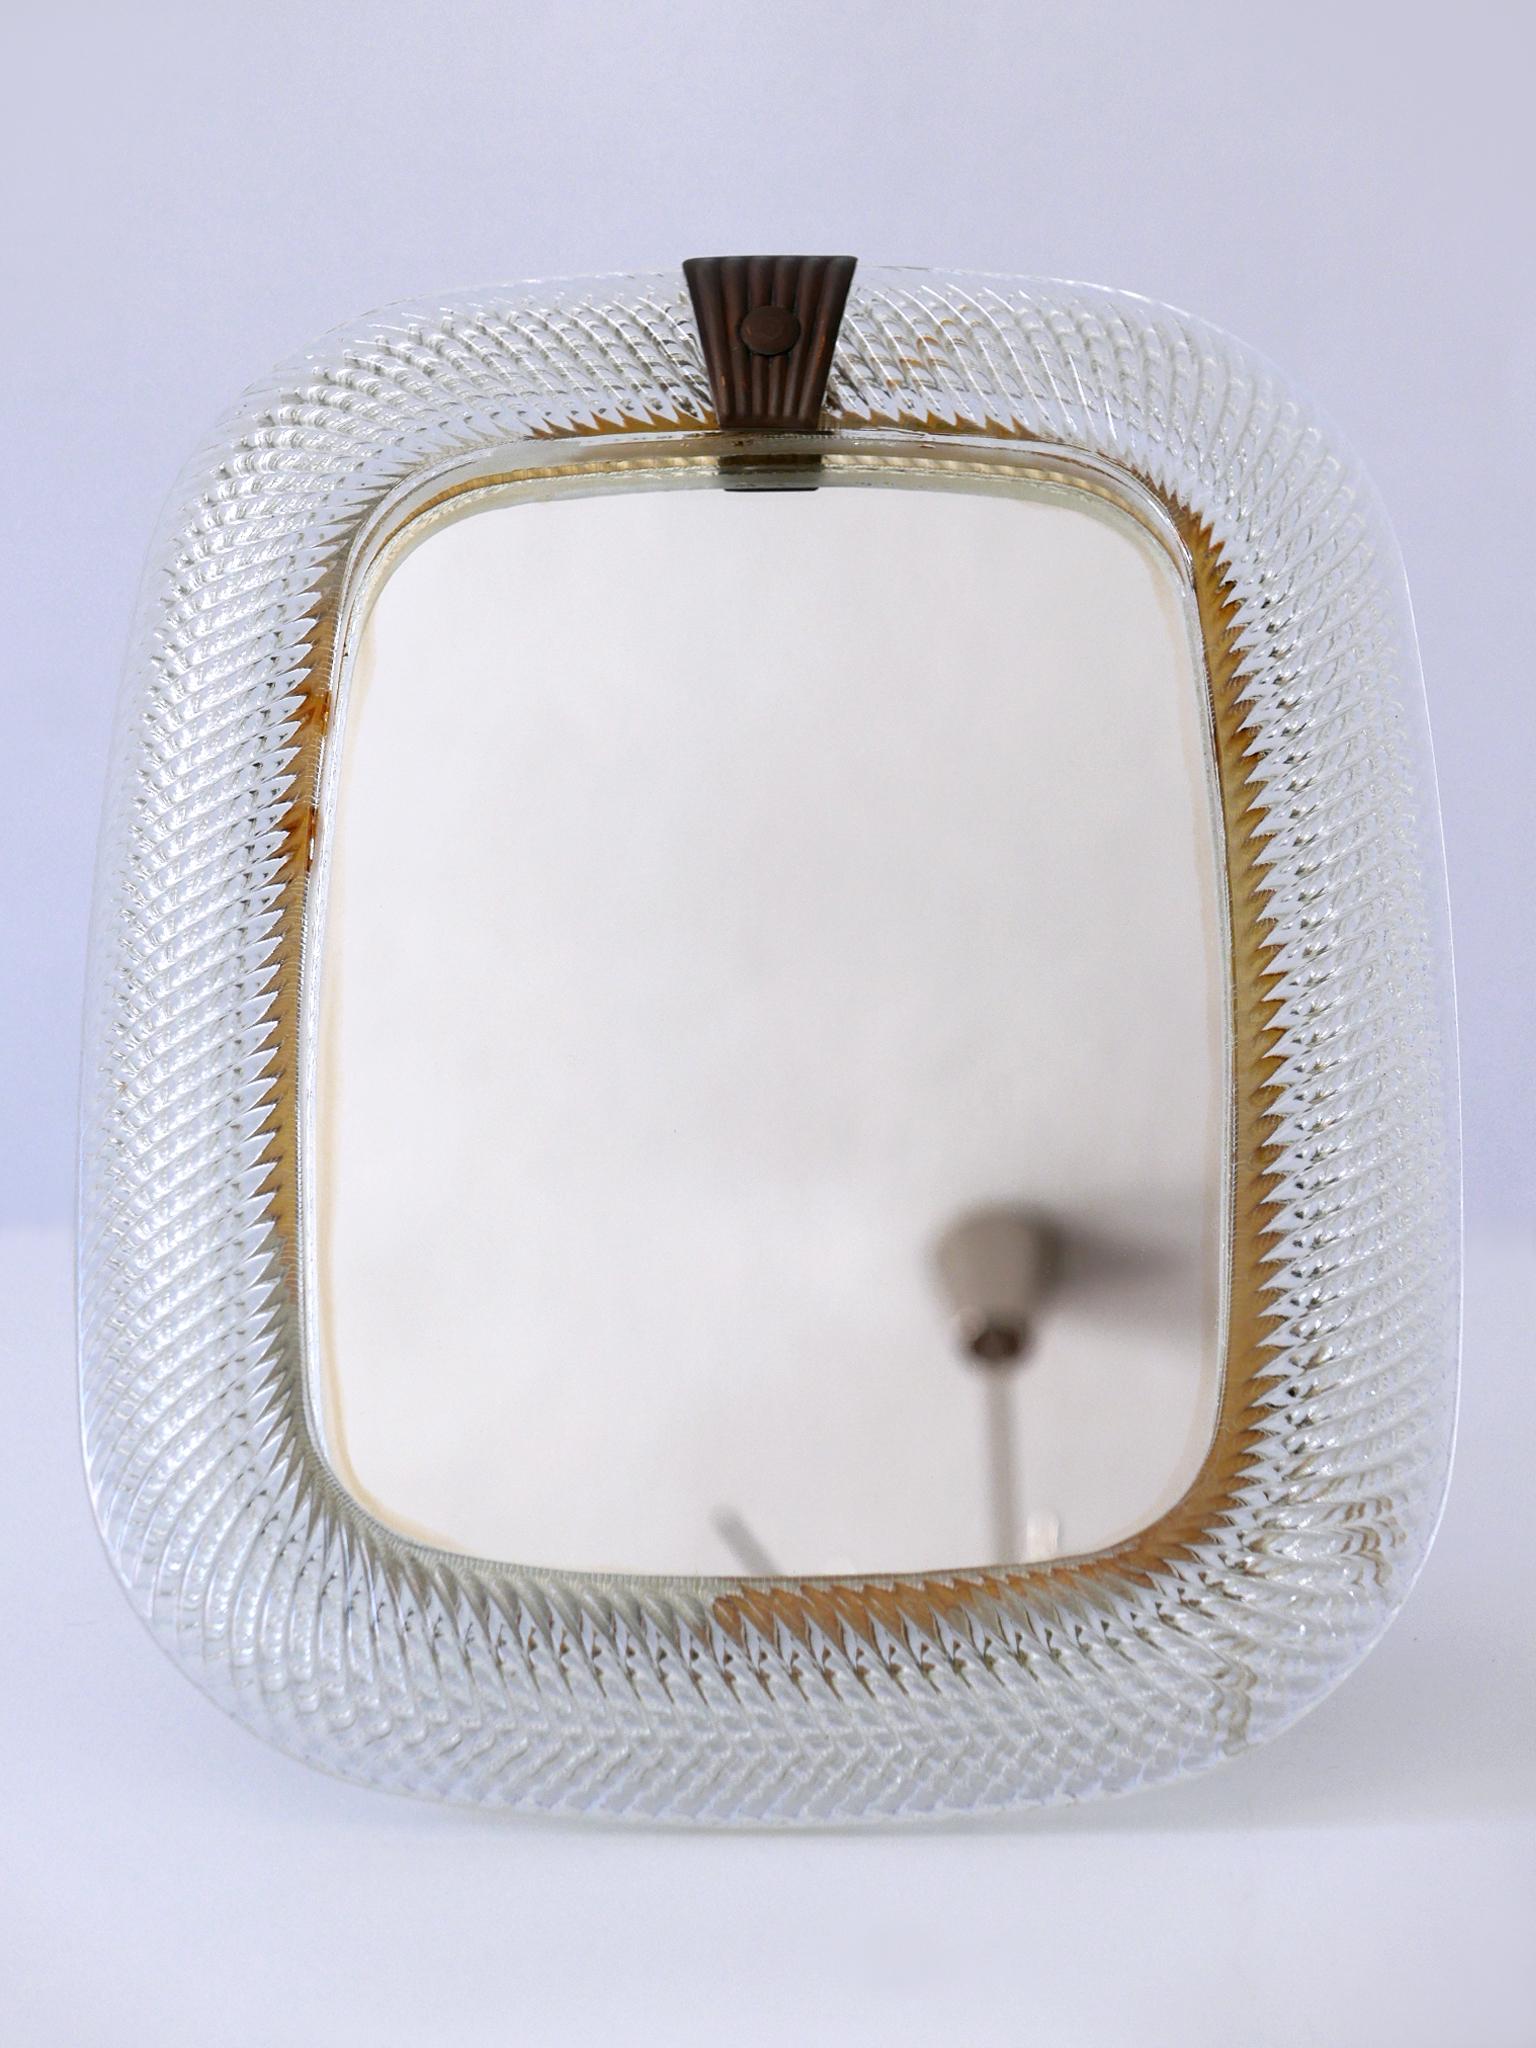 Elegant Mid-Century Modern Wall or Vanity Mirror by Barovier & Toso Italy, 1950s For Sale 10